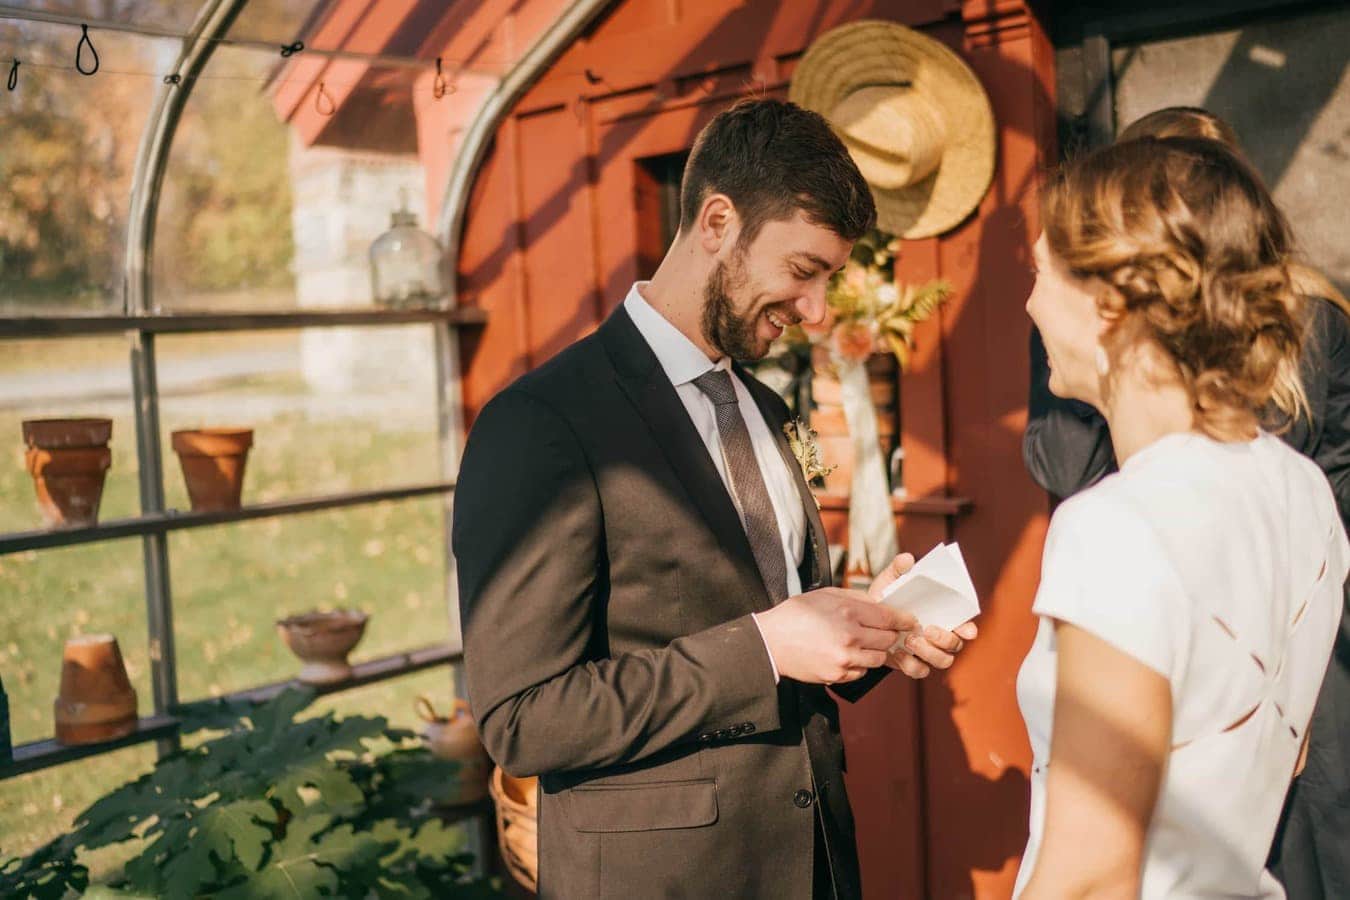 Groom reads wedding vows to bride during ceremony in Catskills.